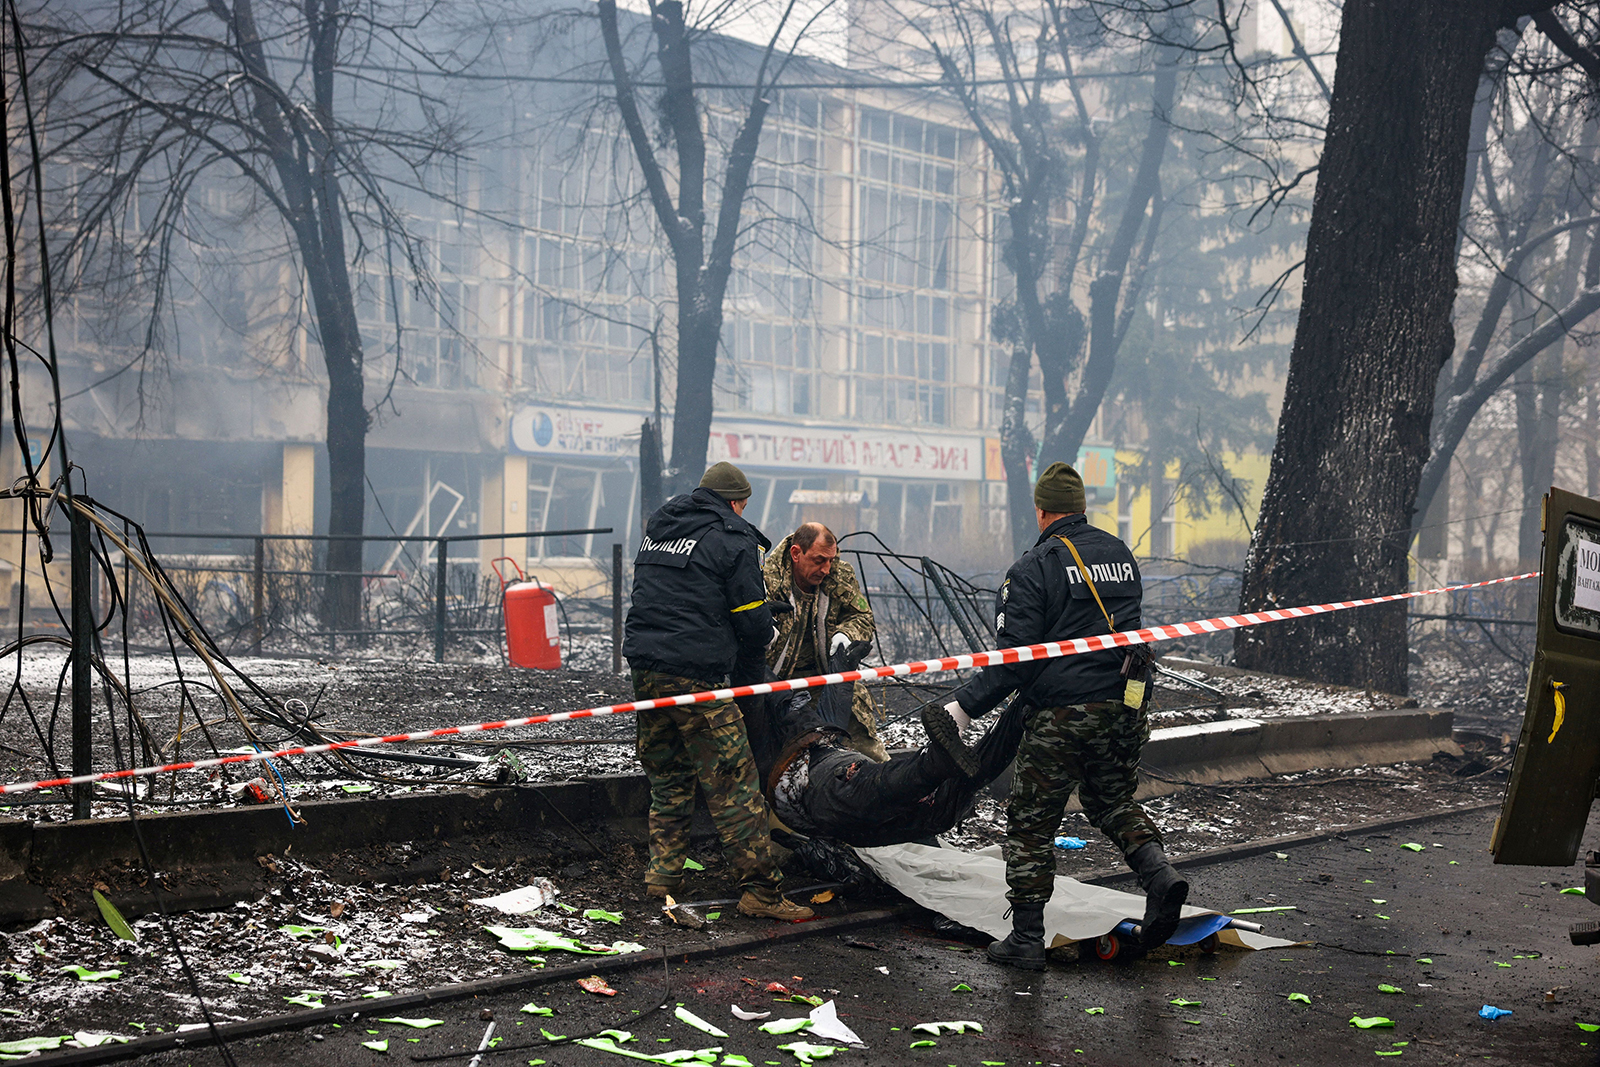 Conflicting accounts about civilian deaths in Ukraine